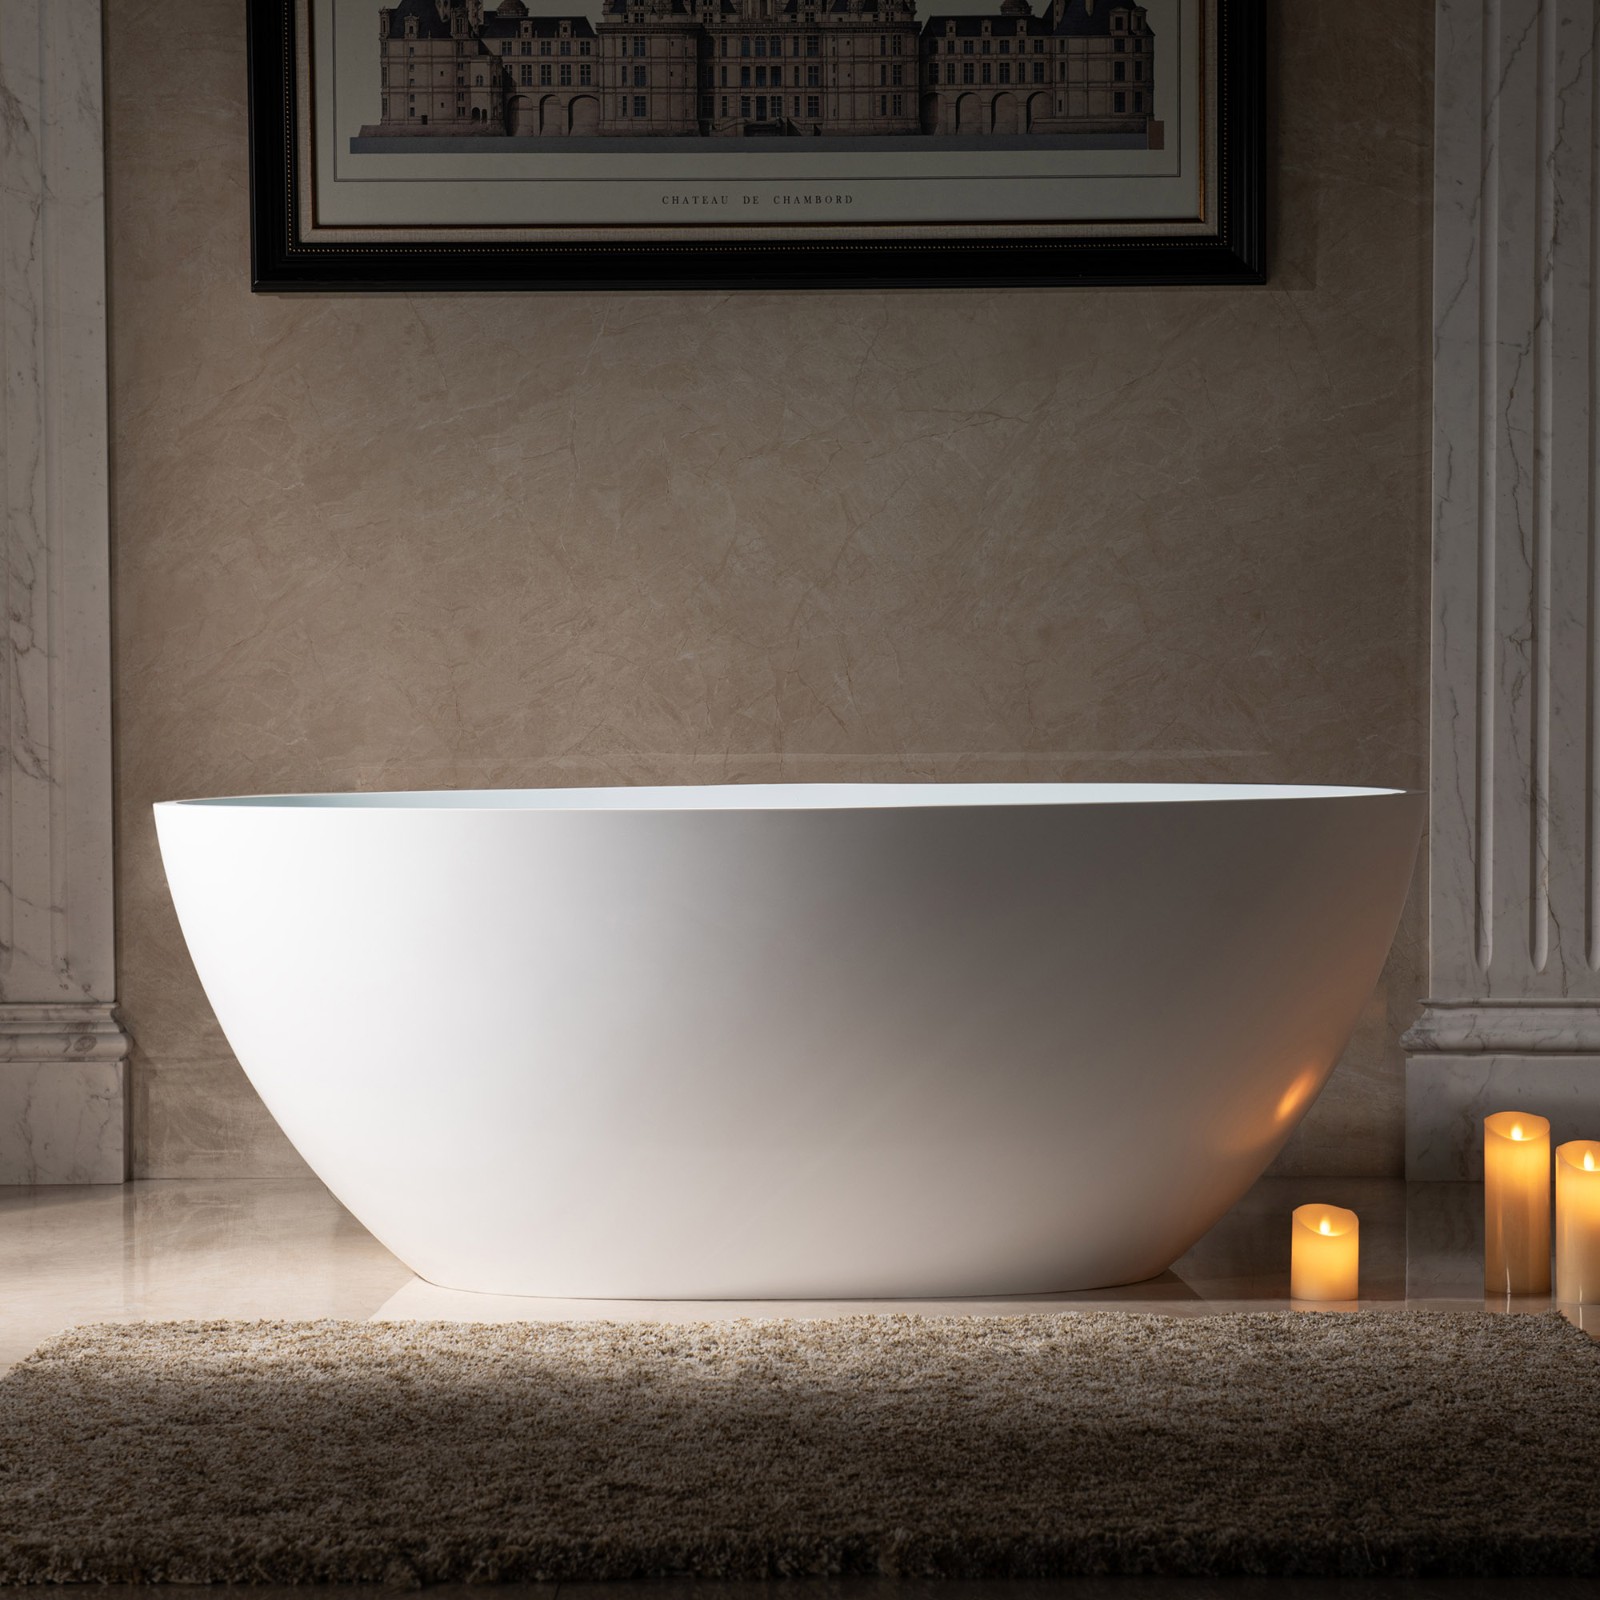  WOODBRIDGE 59 in. x 30.75 in. Luxury Contemporary Solid Surface Freestanding Bathtub in Matte White_610